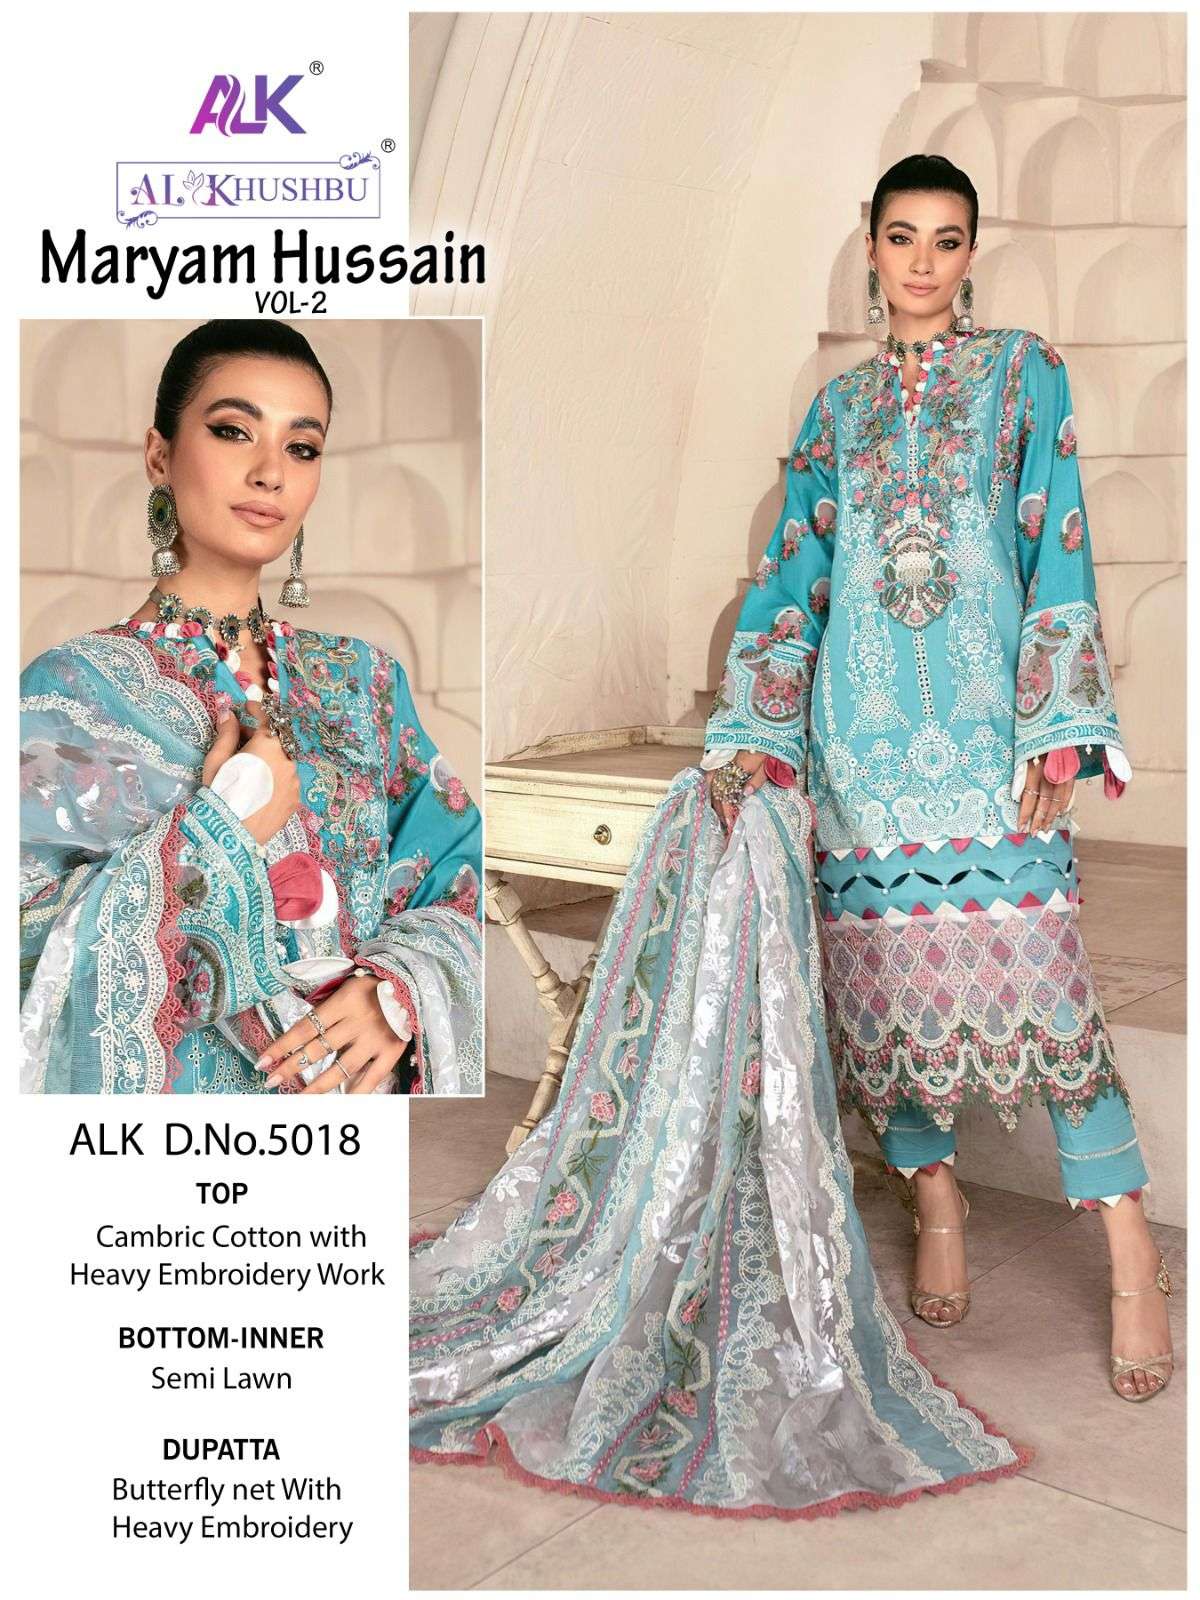 AL KHUSHBU MARYAM HUSSAIN VOL 2 CAMBRIC COTTON WITH EMBROIDE...